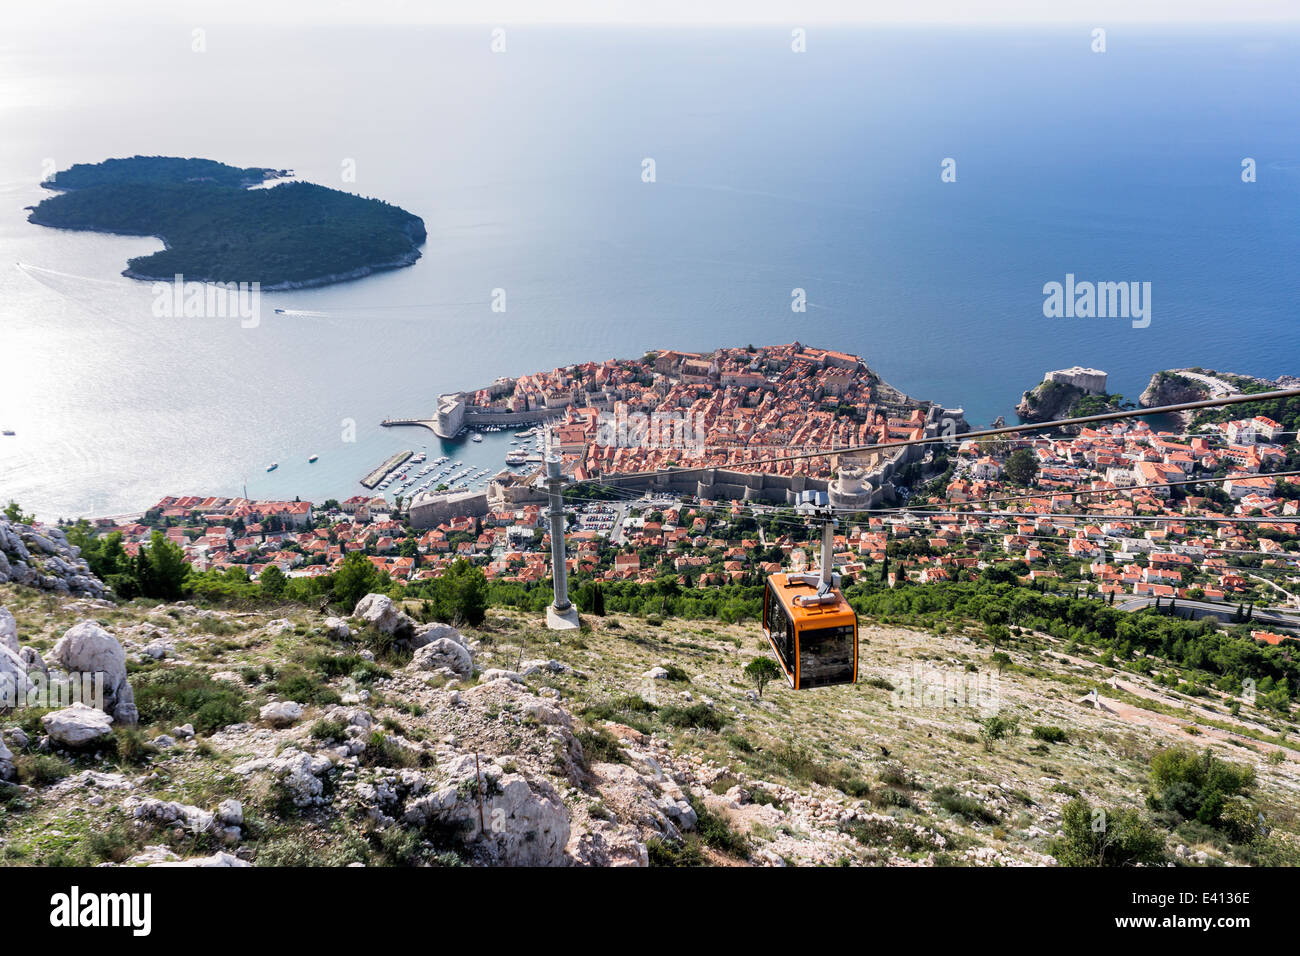 Croatia, Dubrovnik, cabin of cable car in front of historic old city, elevated view Stock Photo